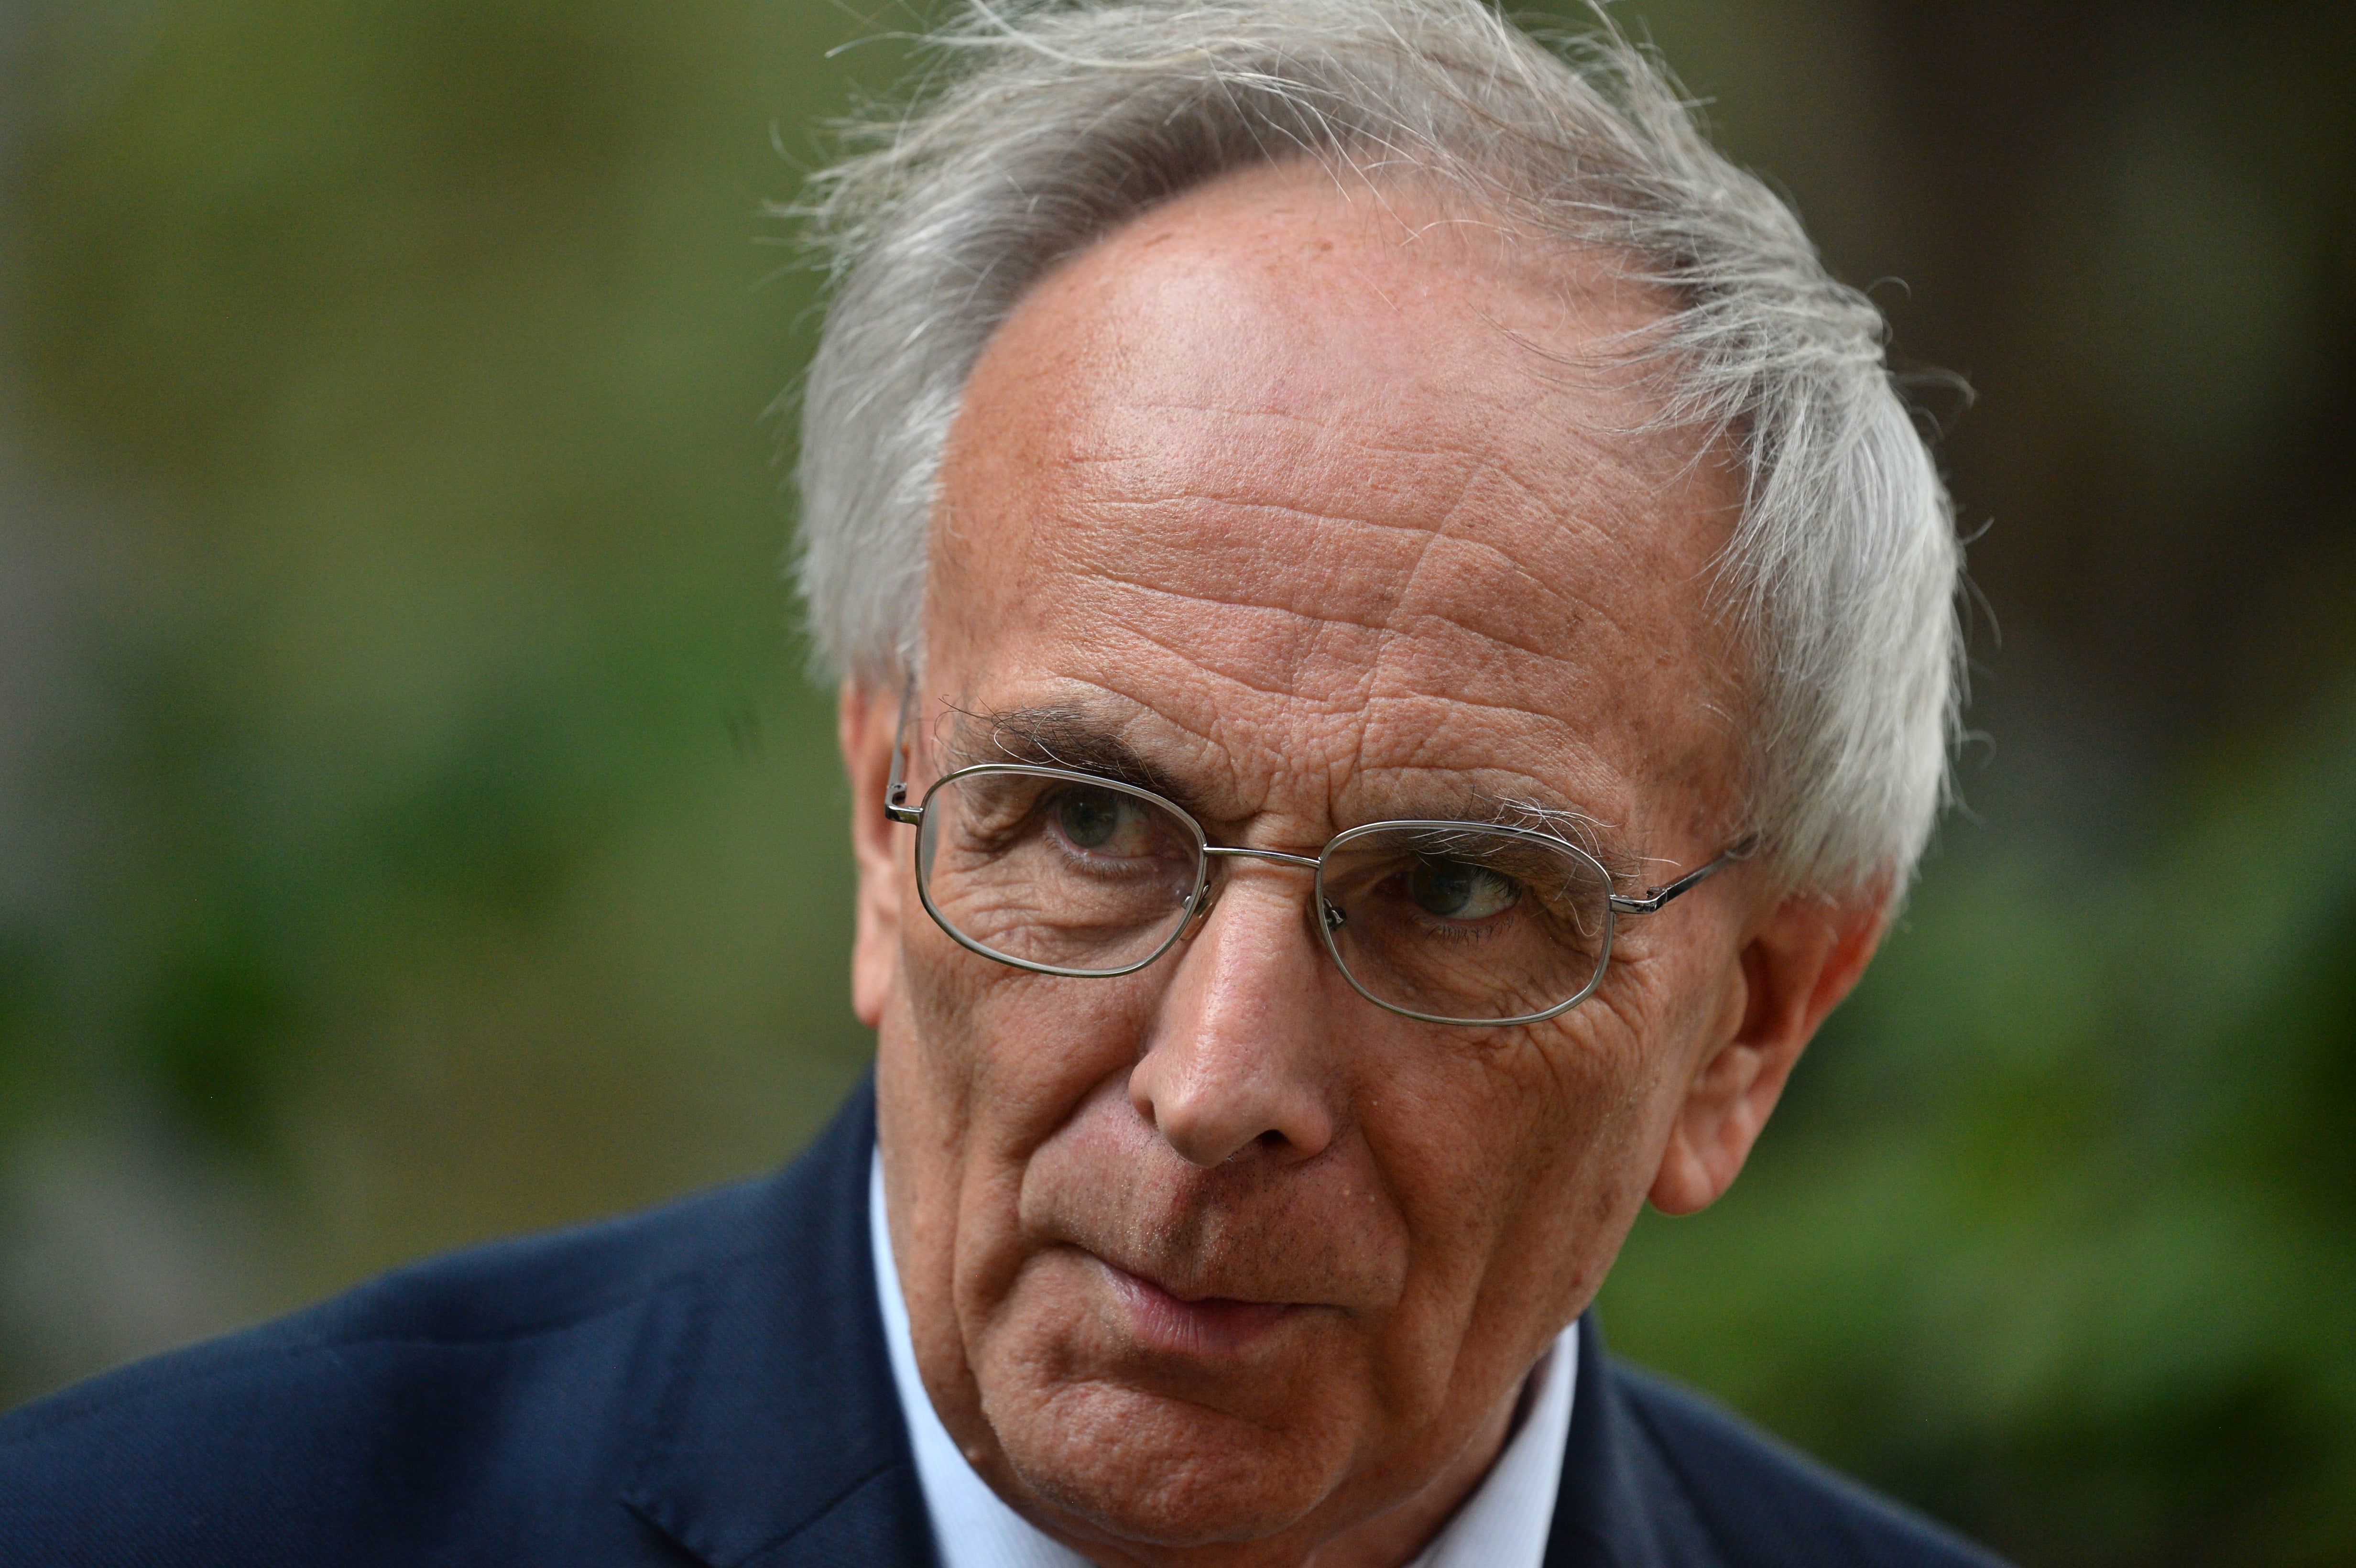 Peter Bone said he agrees with Lord Frost on Covid measures (Kirsty O’Connor/PA)